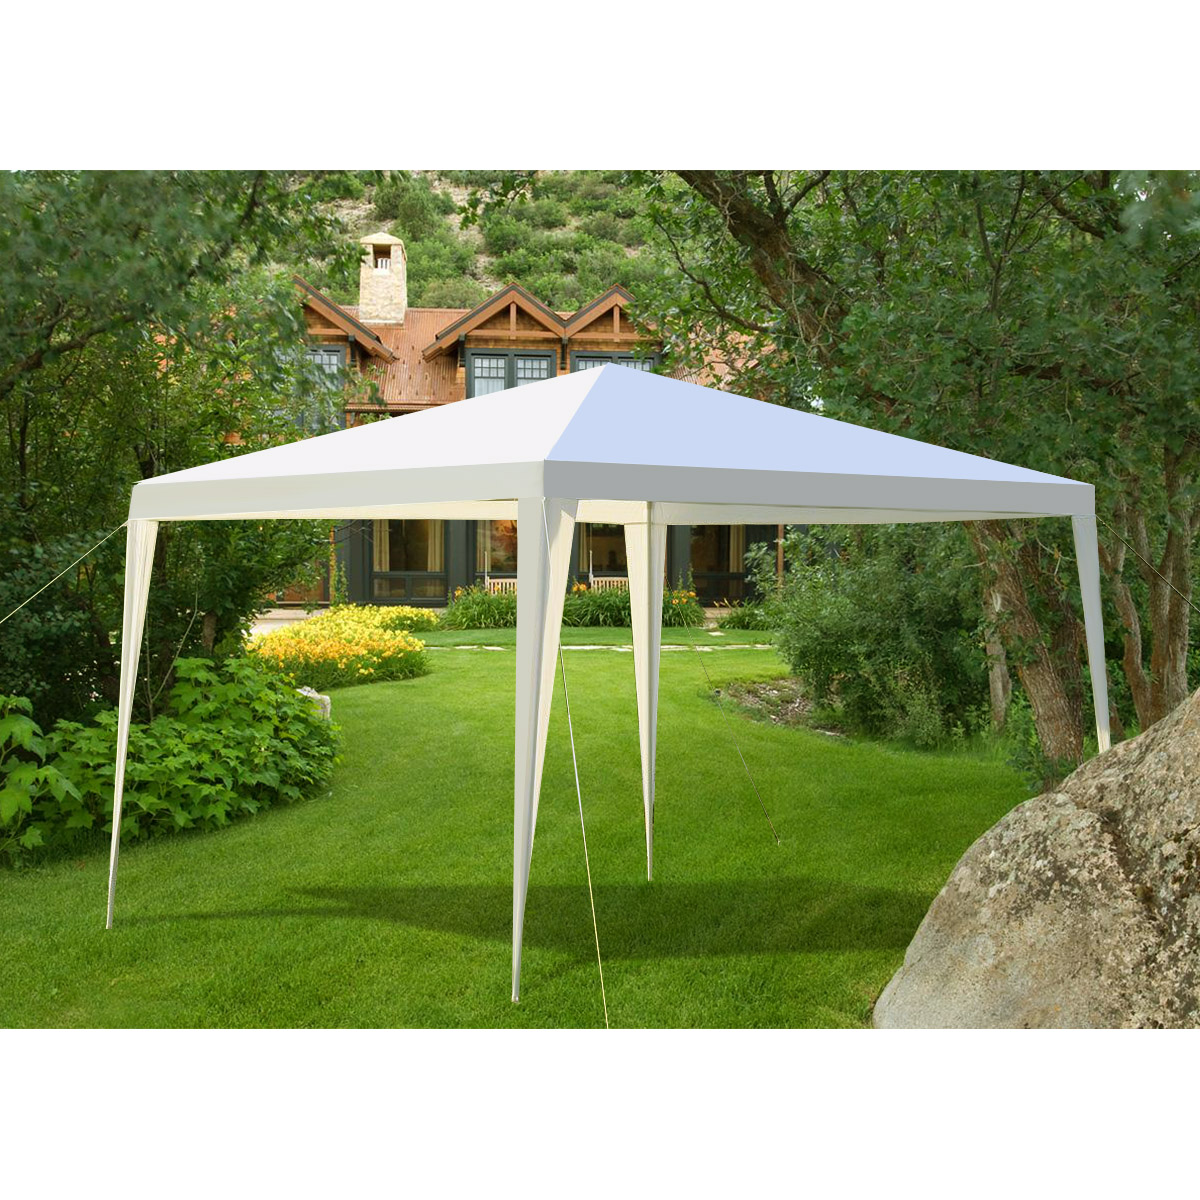 Gymax Outdoor Heavy Duty 10'x10' Canopy Party Wedding Tent Gazebo Pavilion  Cater Event